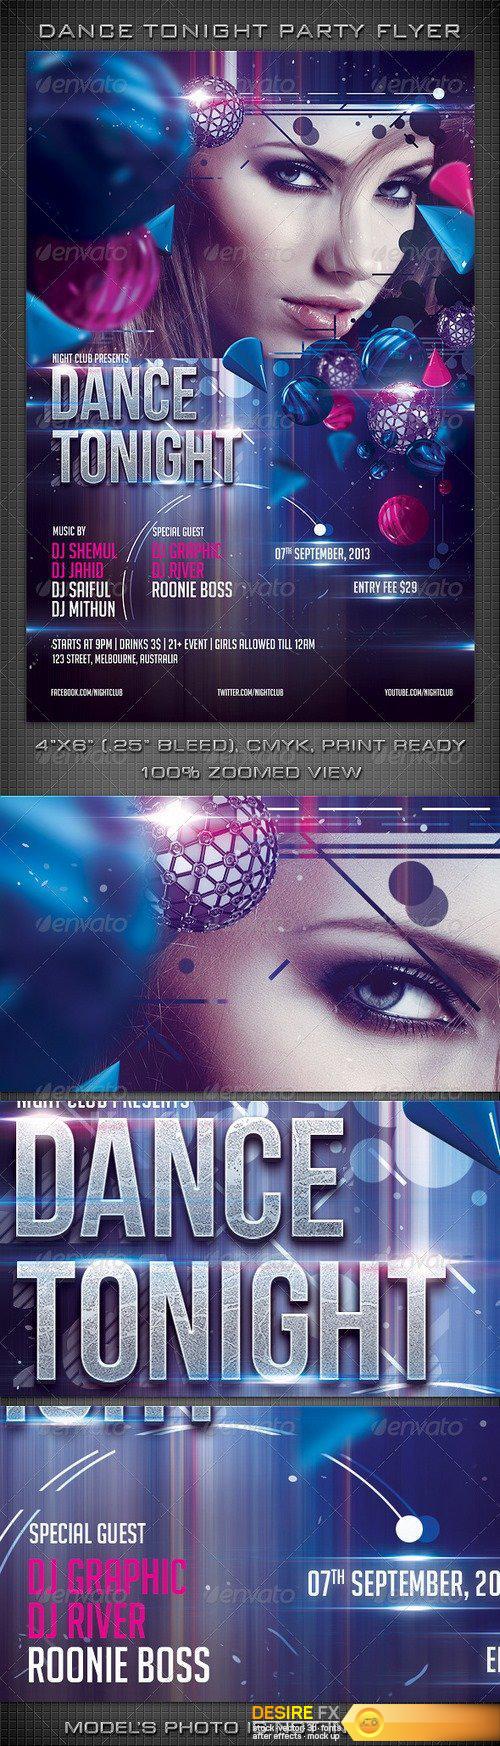 Graphicriver - Dance Tonight Party Flyer 2905250